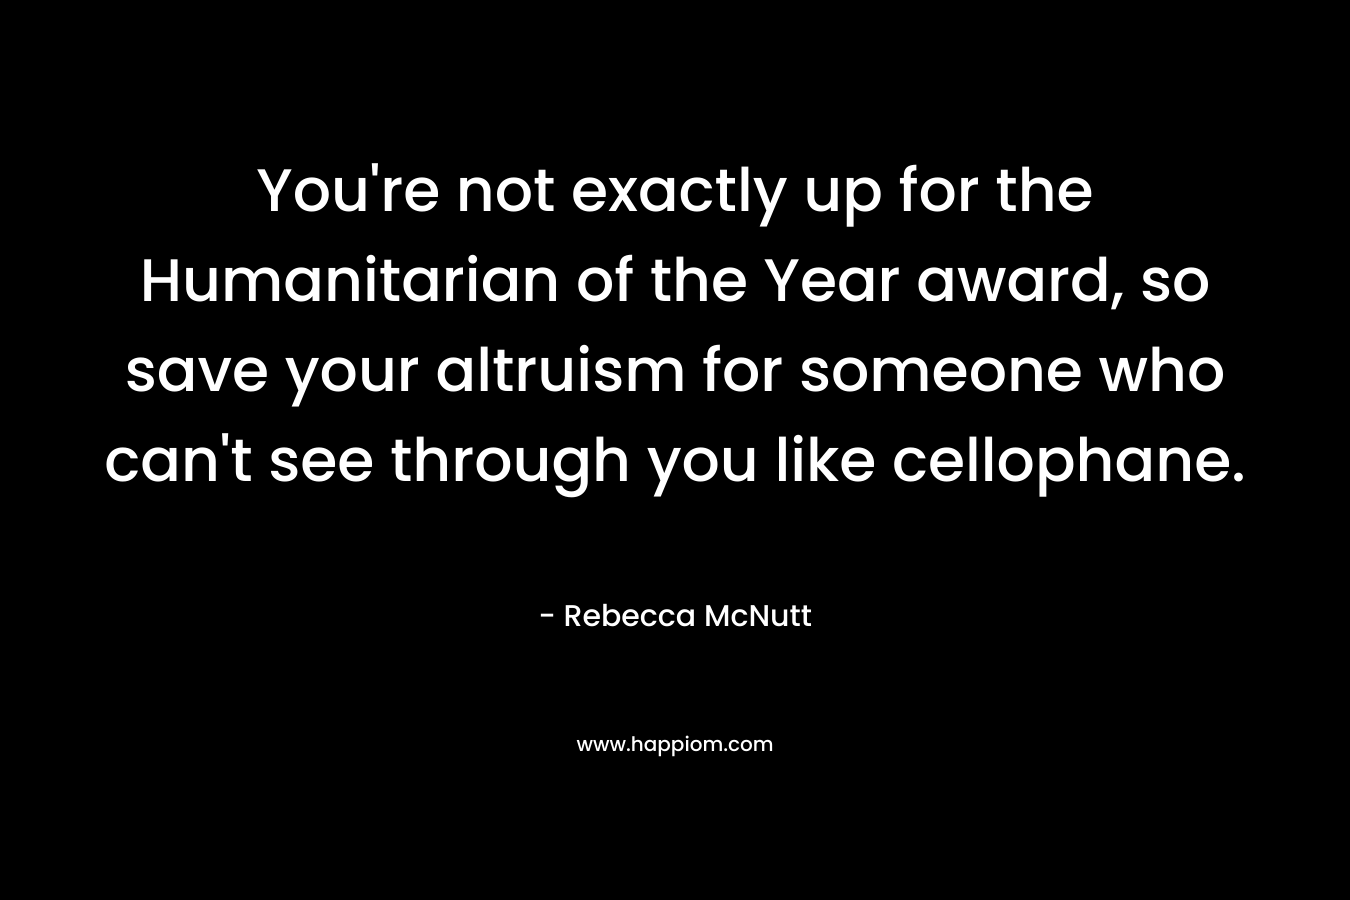 You're not exactly up for the Humanitarian of the Year award, so save your altruism for someone who can't see through you like cellophane.